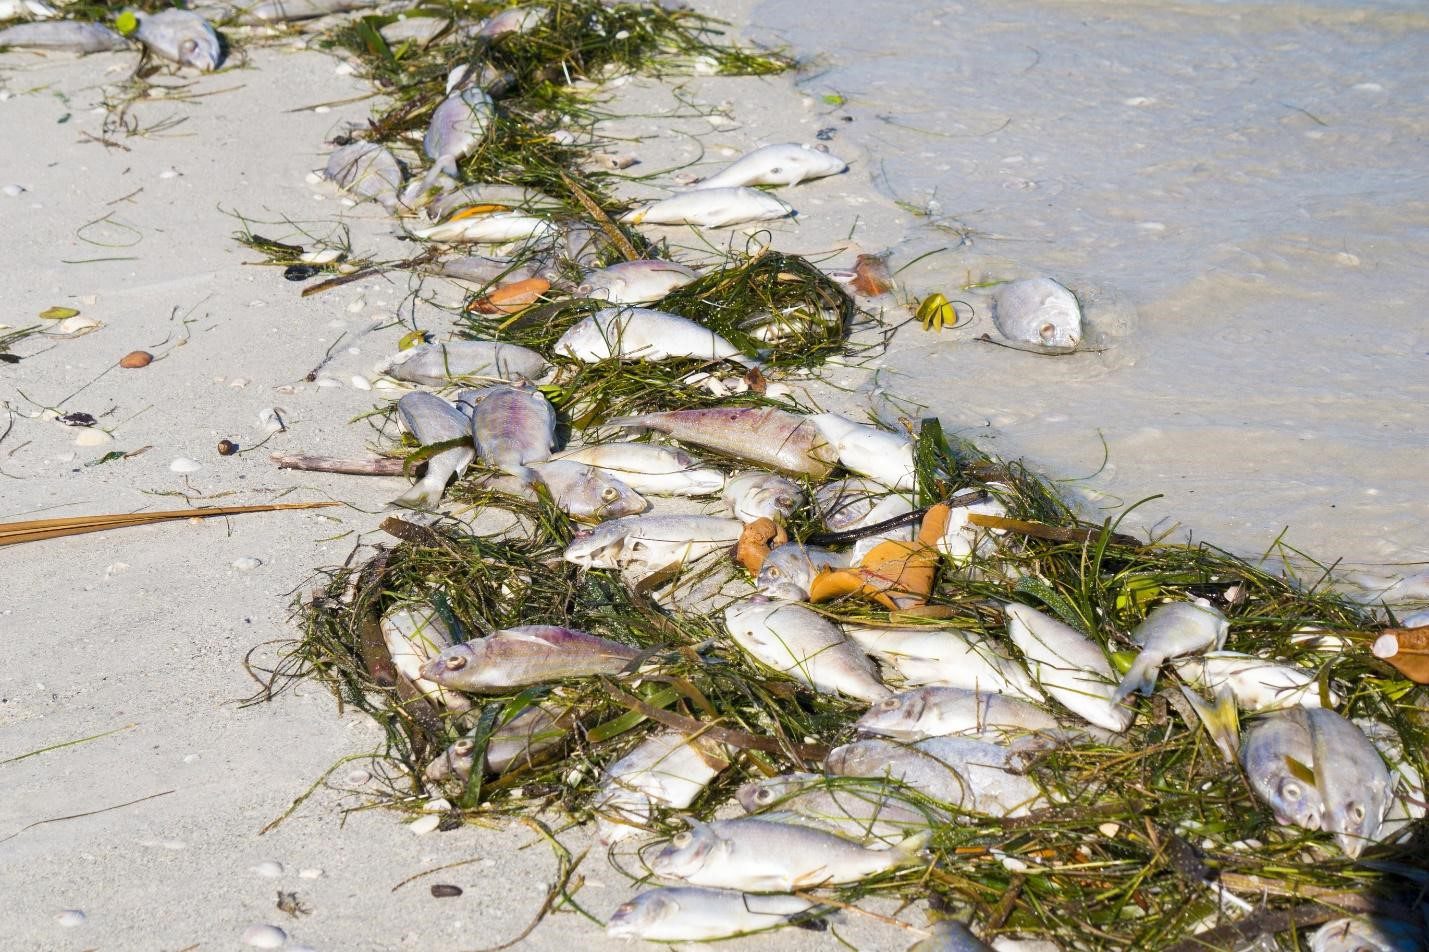 Dead fish from Red Tide wash up on shore near St. Pete Beach, Florida